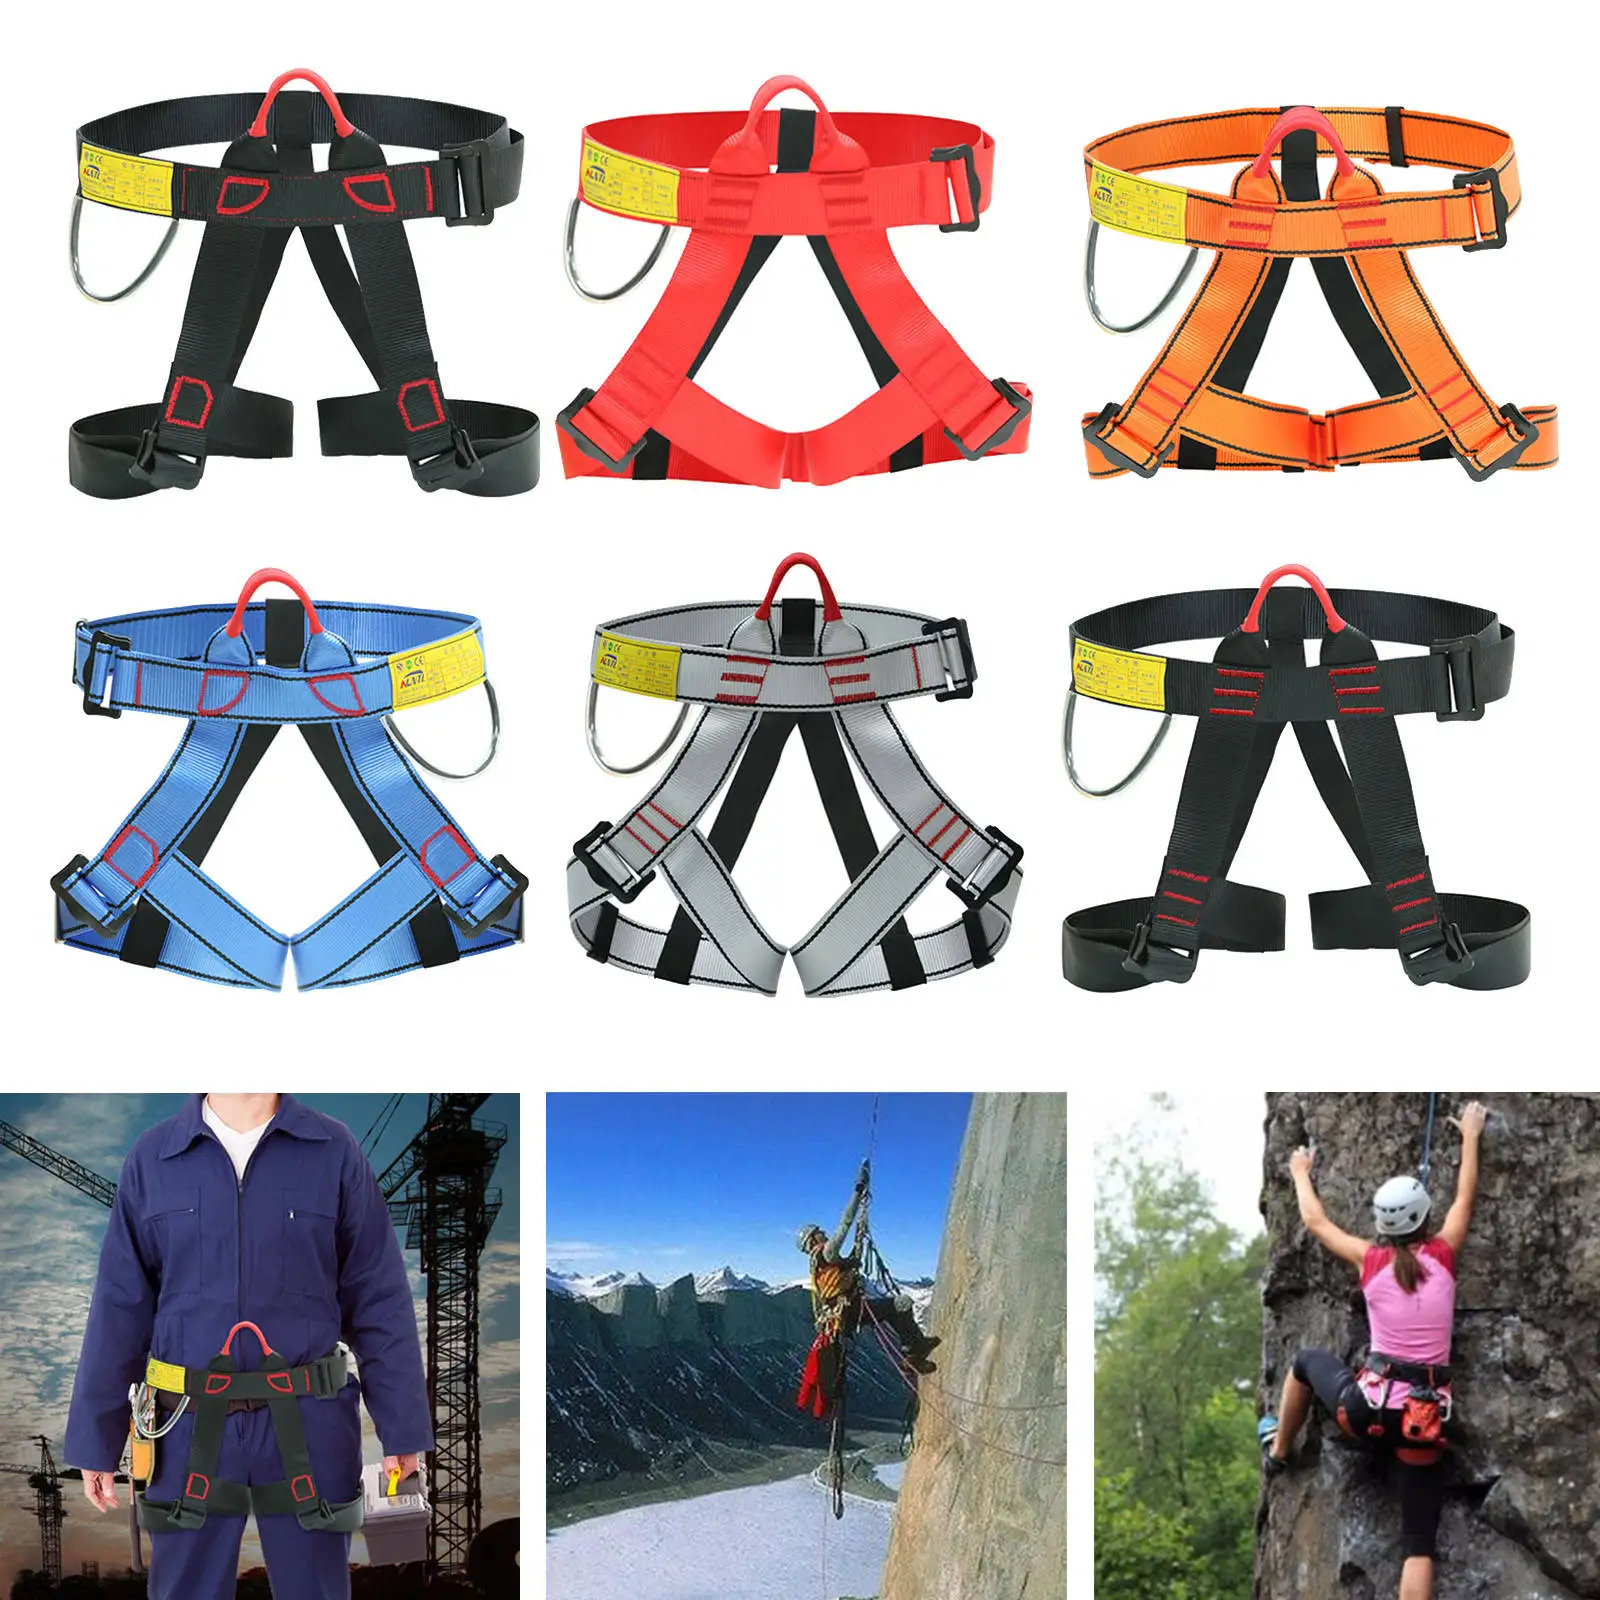 YaeCCC Full Body Climbing Harness Safety Harness Fall Protection for Mountaineering Fire Rescuing Rock Climbing Rappelling Tree 